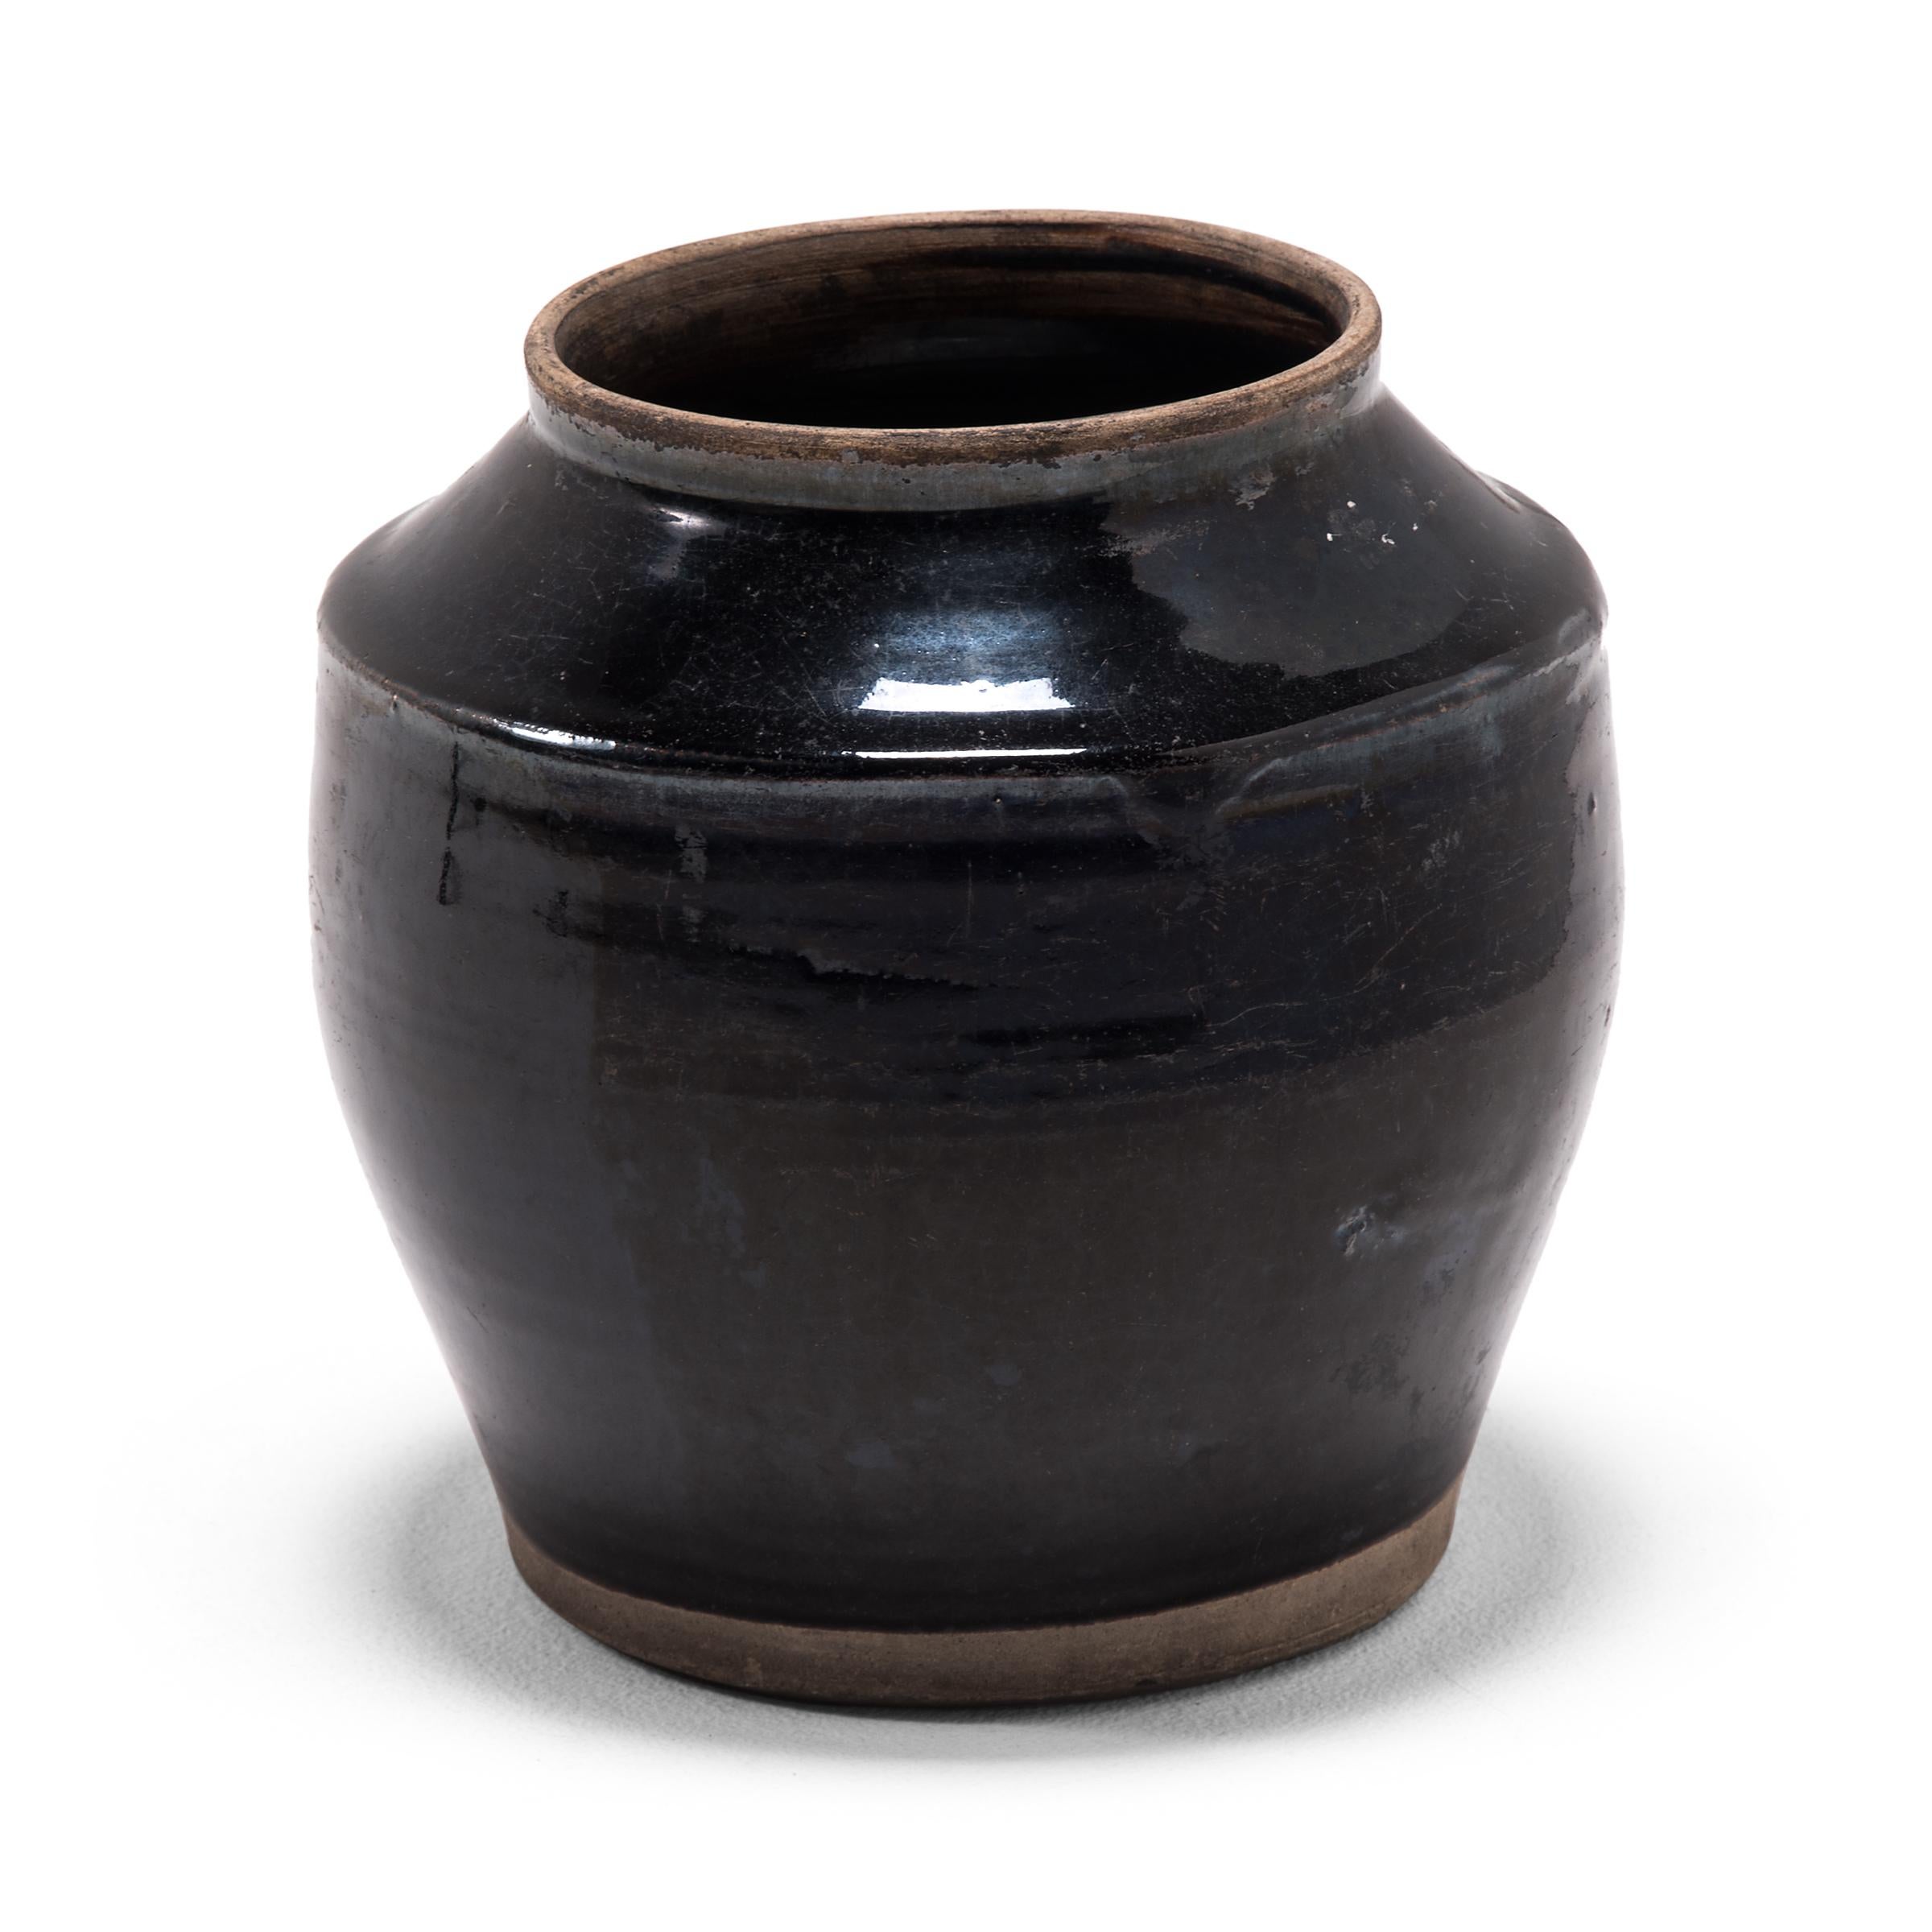 A dark glaze coats the angular body of this squat kitchen vessel, pooling in the shallow ridges along its sides with subtle iridescence. The petite early 20th century dish was once used for storing food in a Qing-dynasty kitchen, as evidenced by its